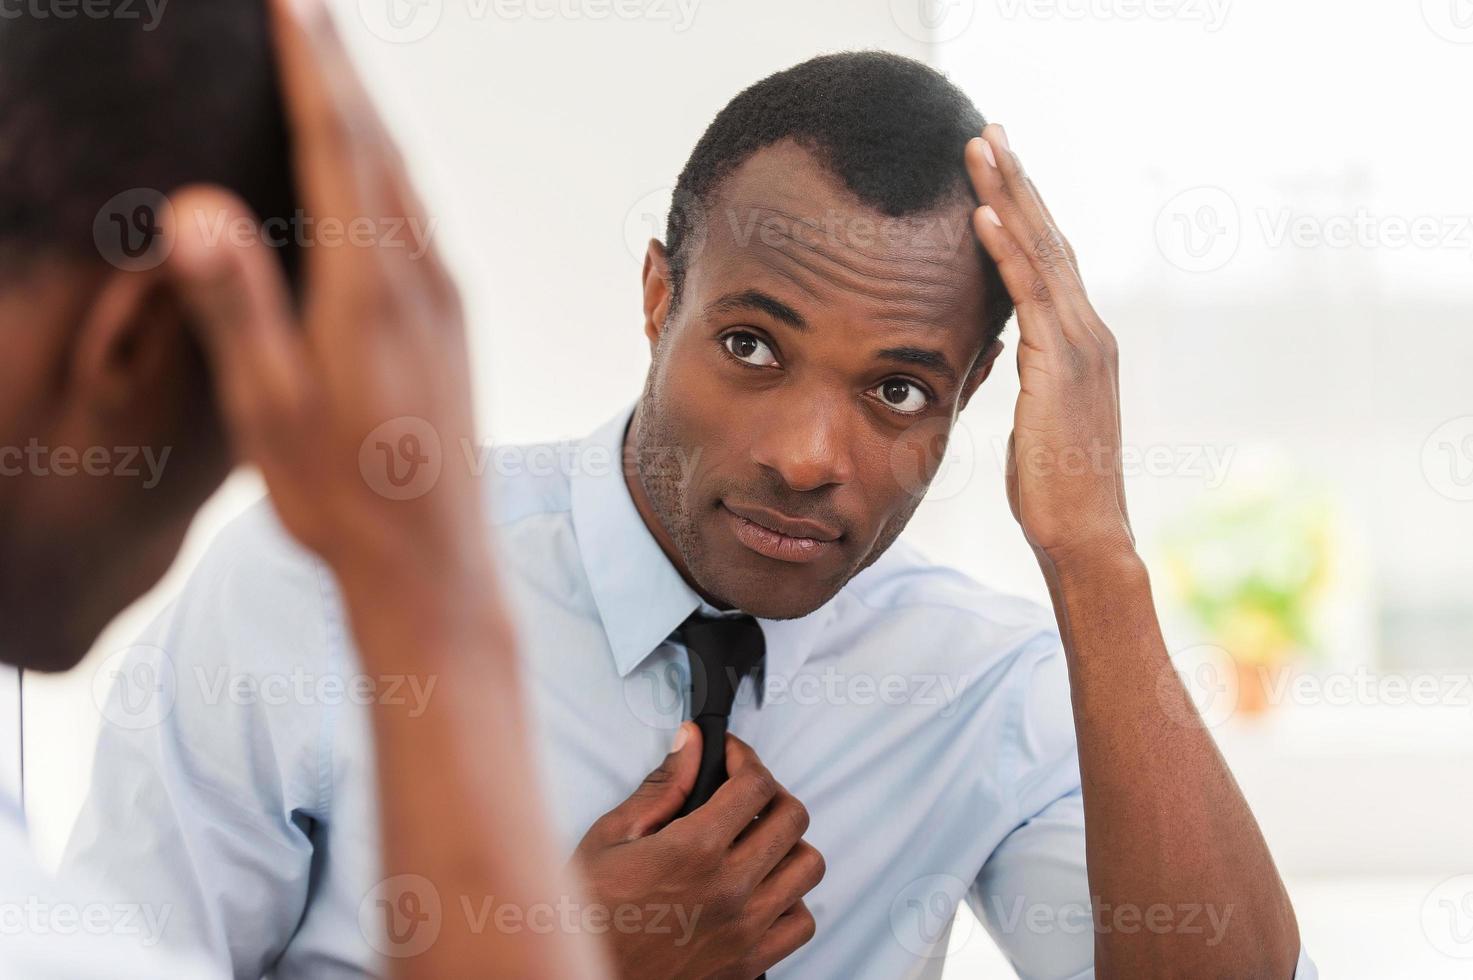 Feeling confident about his look. Young African man looking at the mirror and adjusting his necktie photo